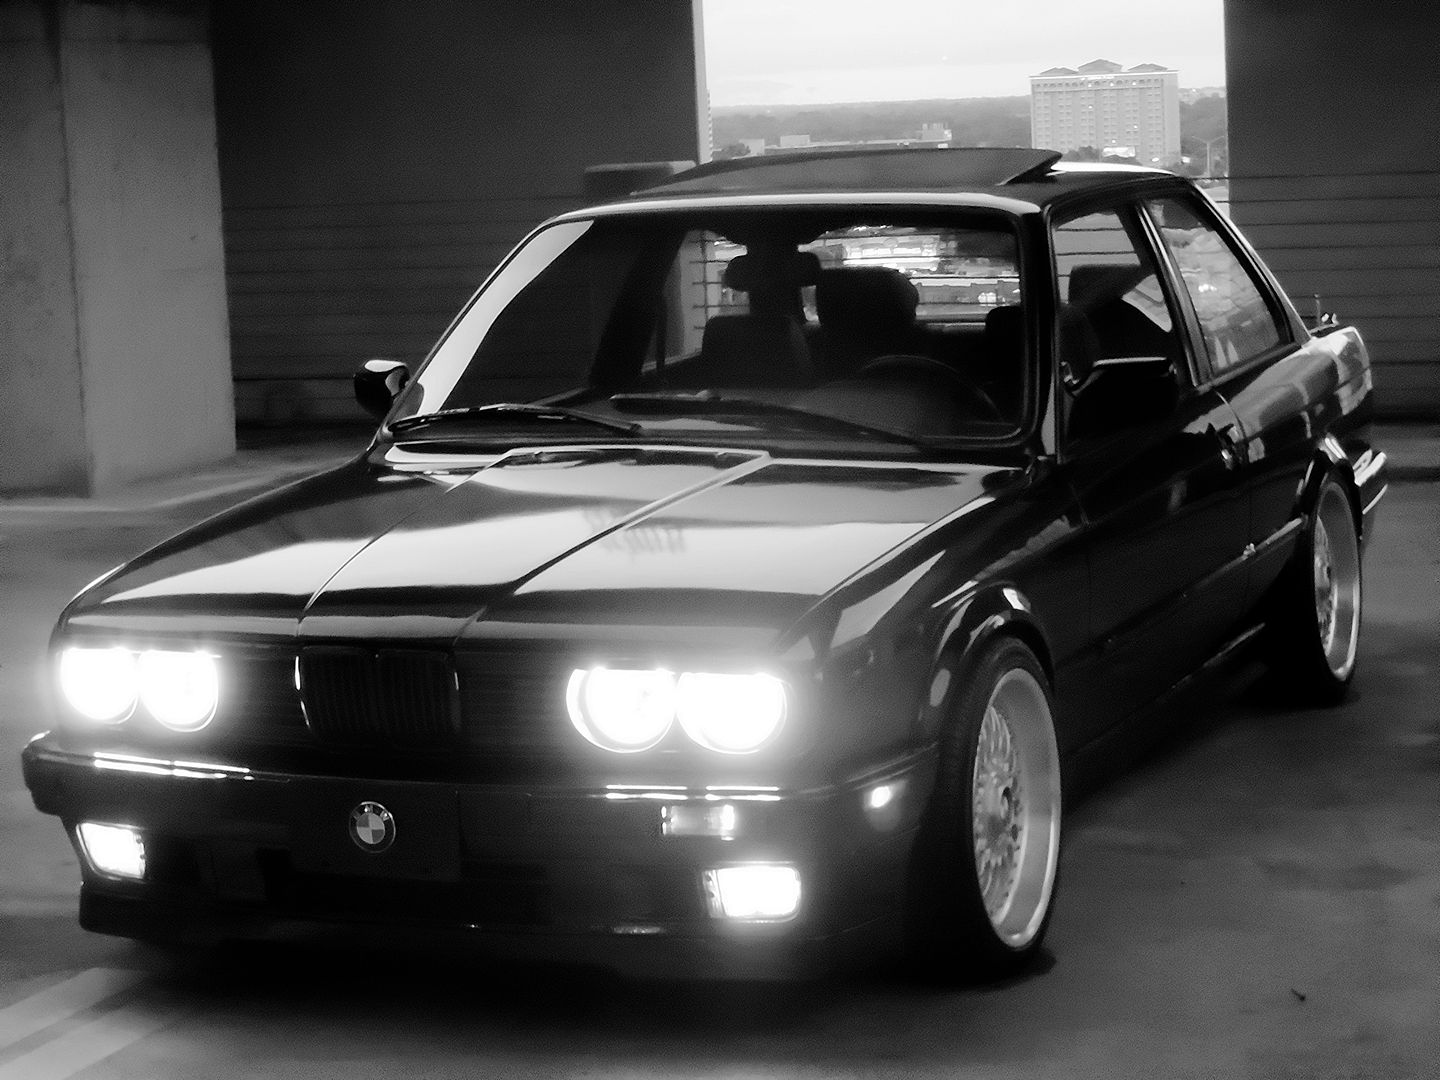 1990 Bmw 325is top speed #1